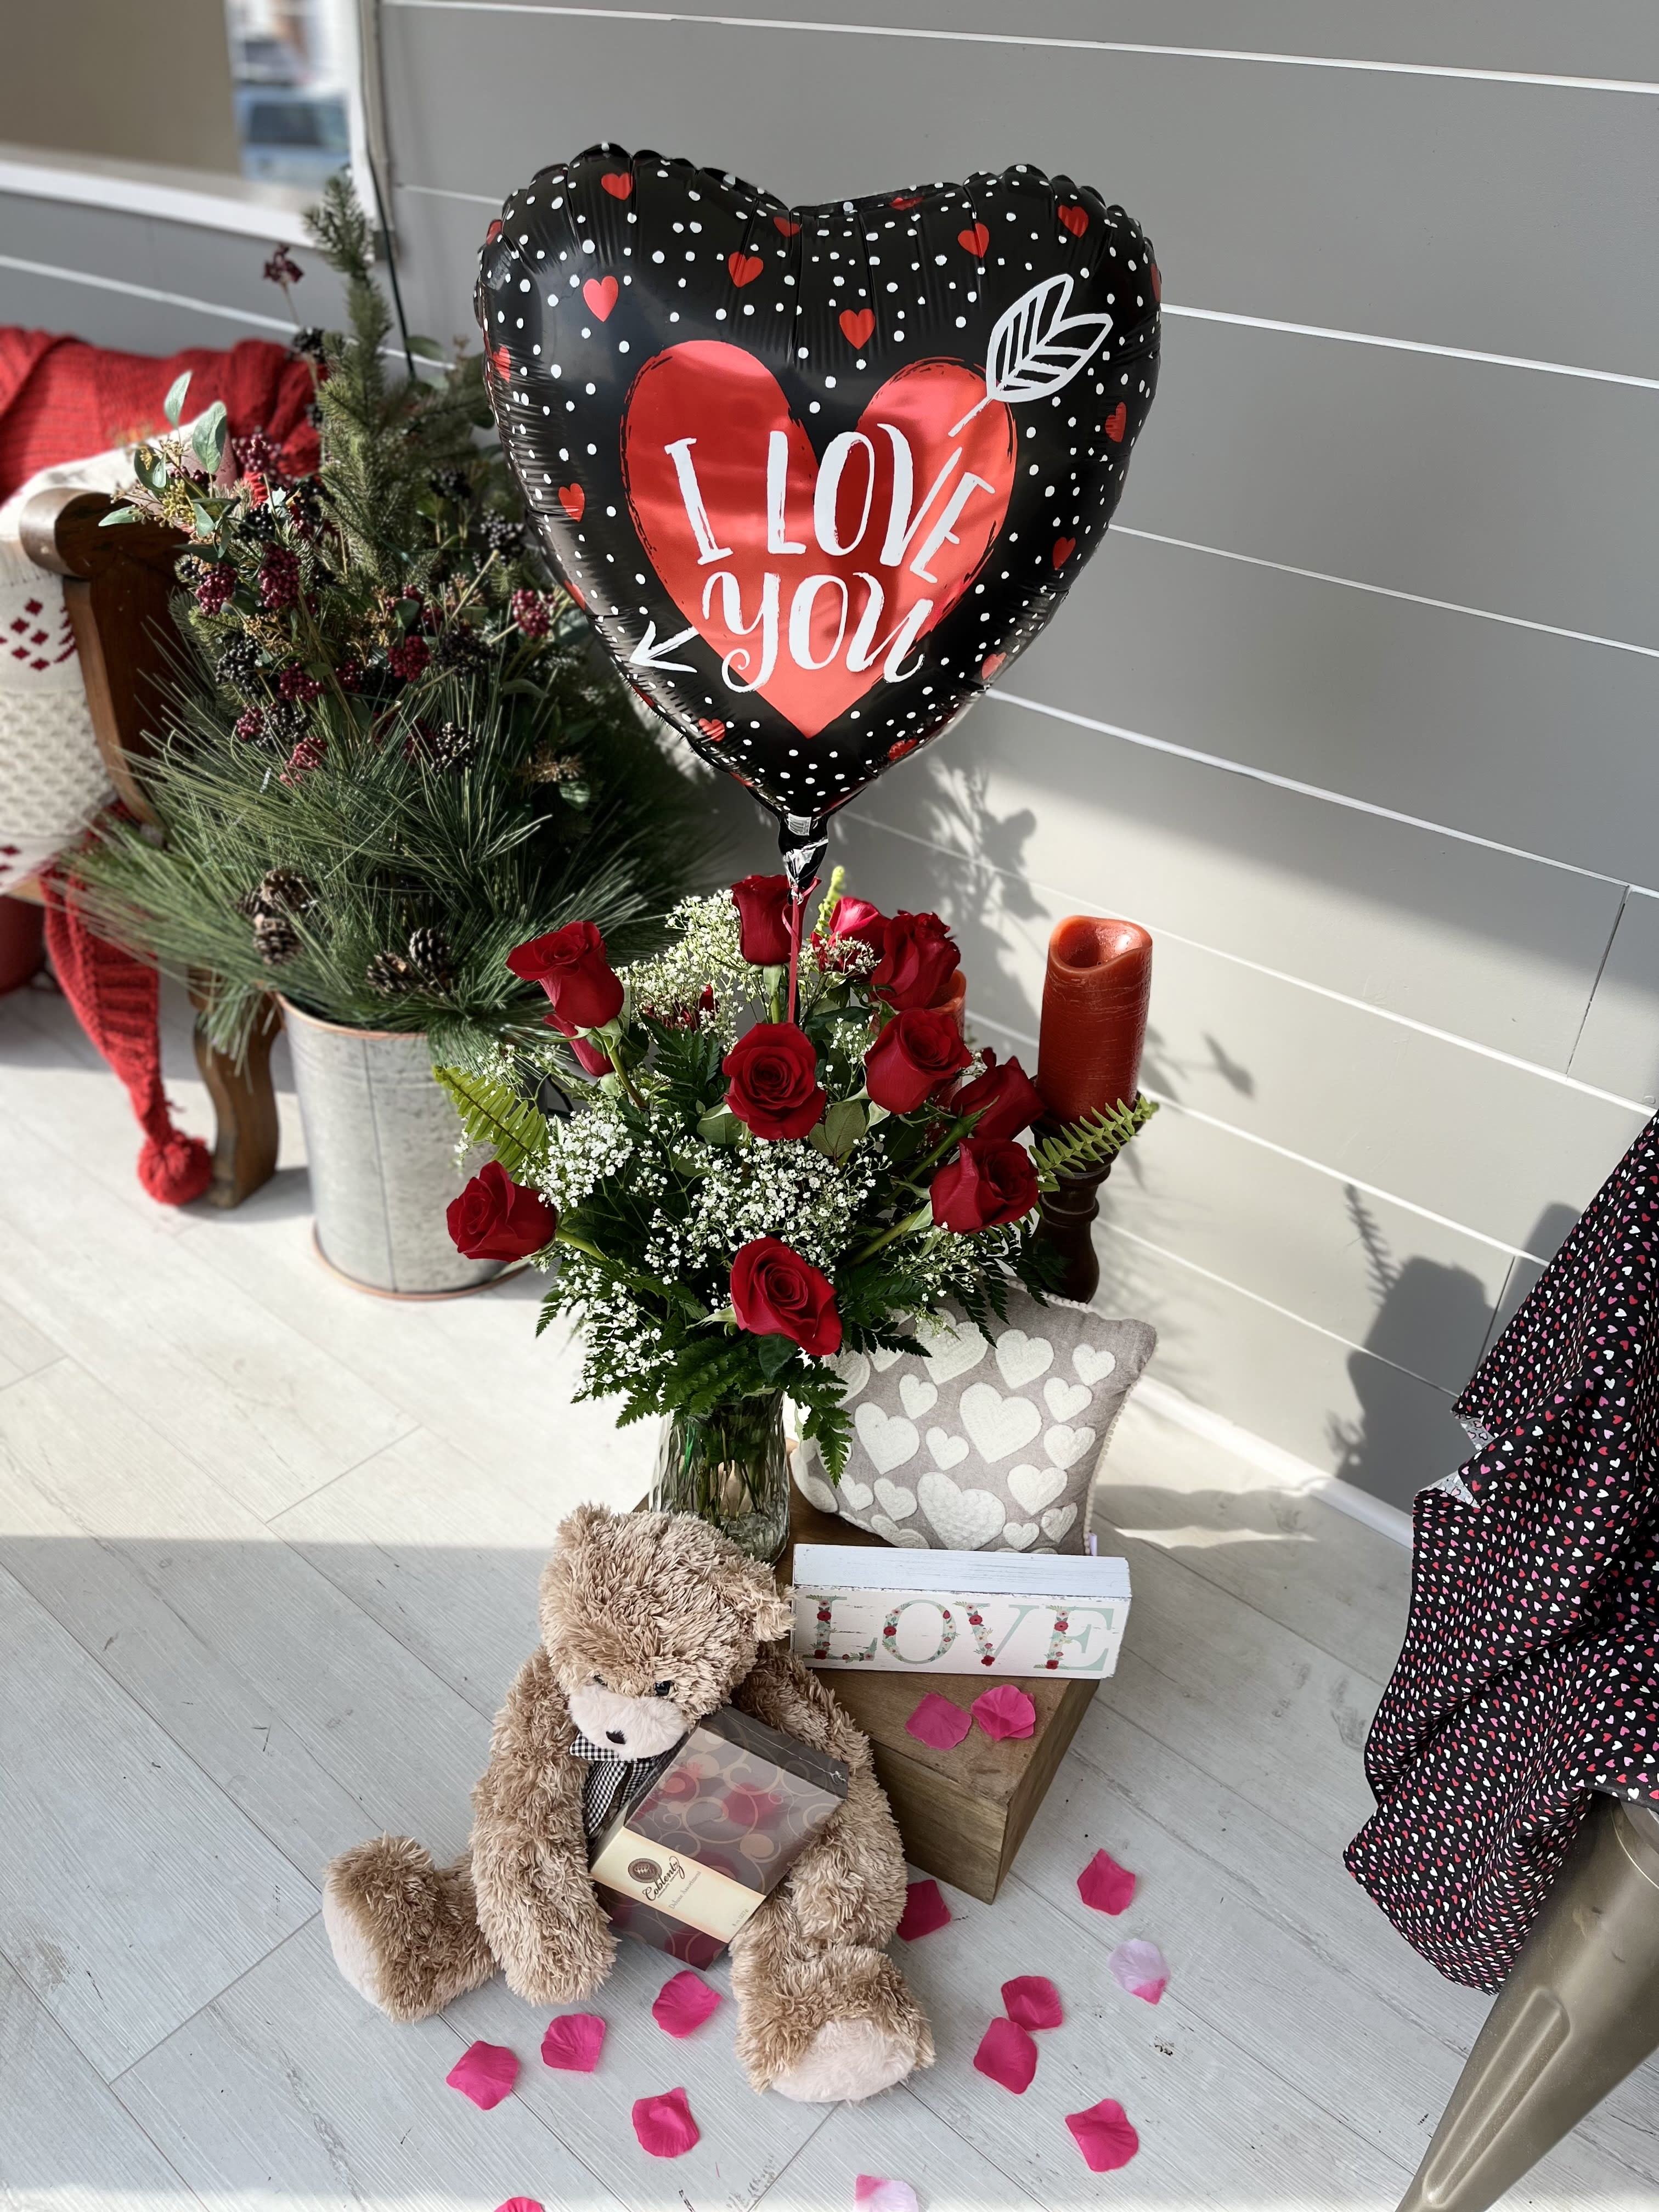 Lots of Love Bundle  - One dozen long stemmed red roses, plush and loveable teddy bear, gourmet chocolate truffles &amp; Valentine's Day balloon 